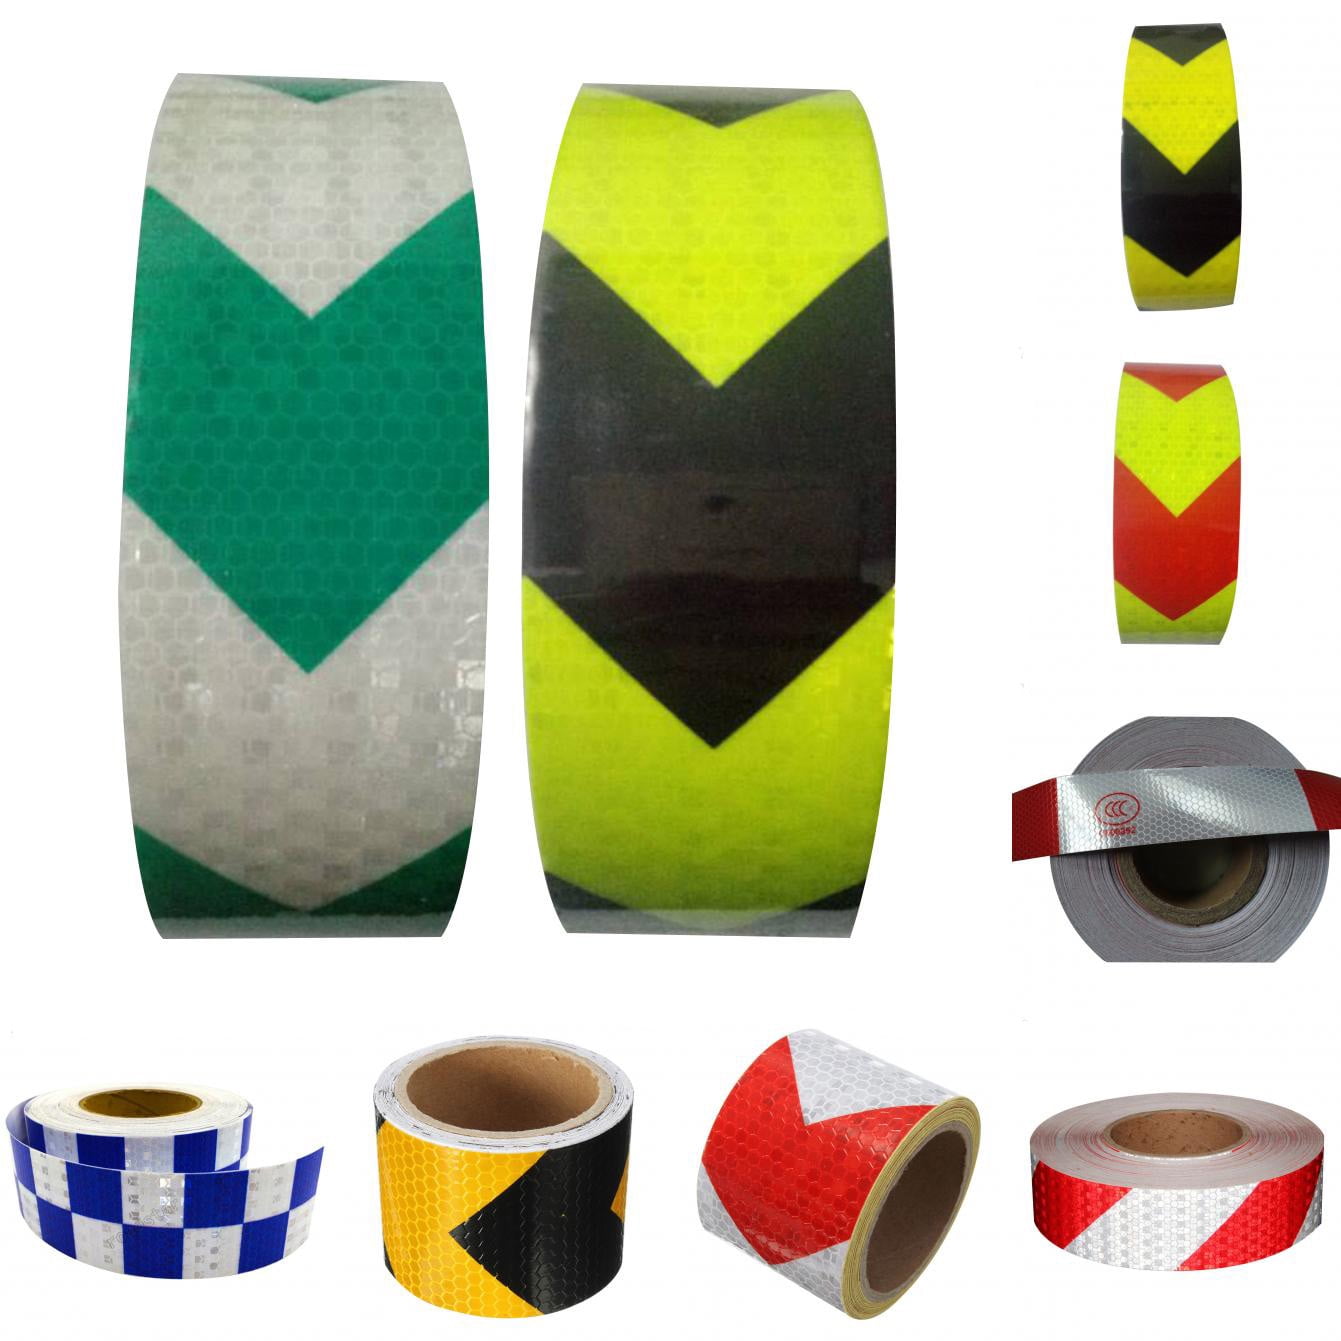 4 Pack 5cm x 3m Reflector Tape Self-Adhesive Sticker High Visibility for Vehicles Cars Trailers Bikes Helmets Reflective Safety Tape Orange White Yellow Green